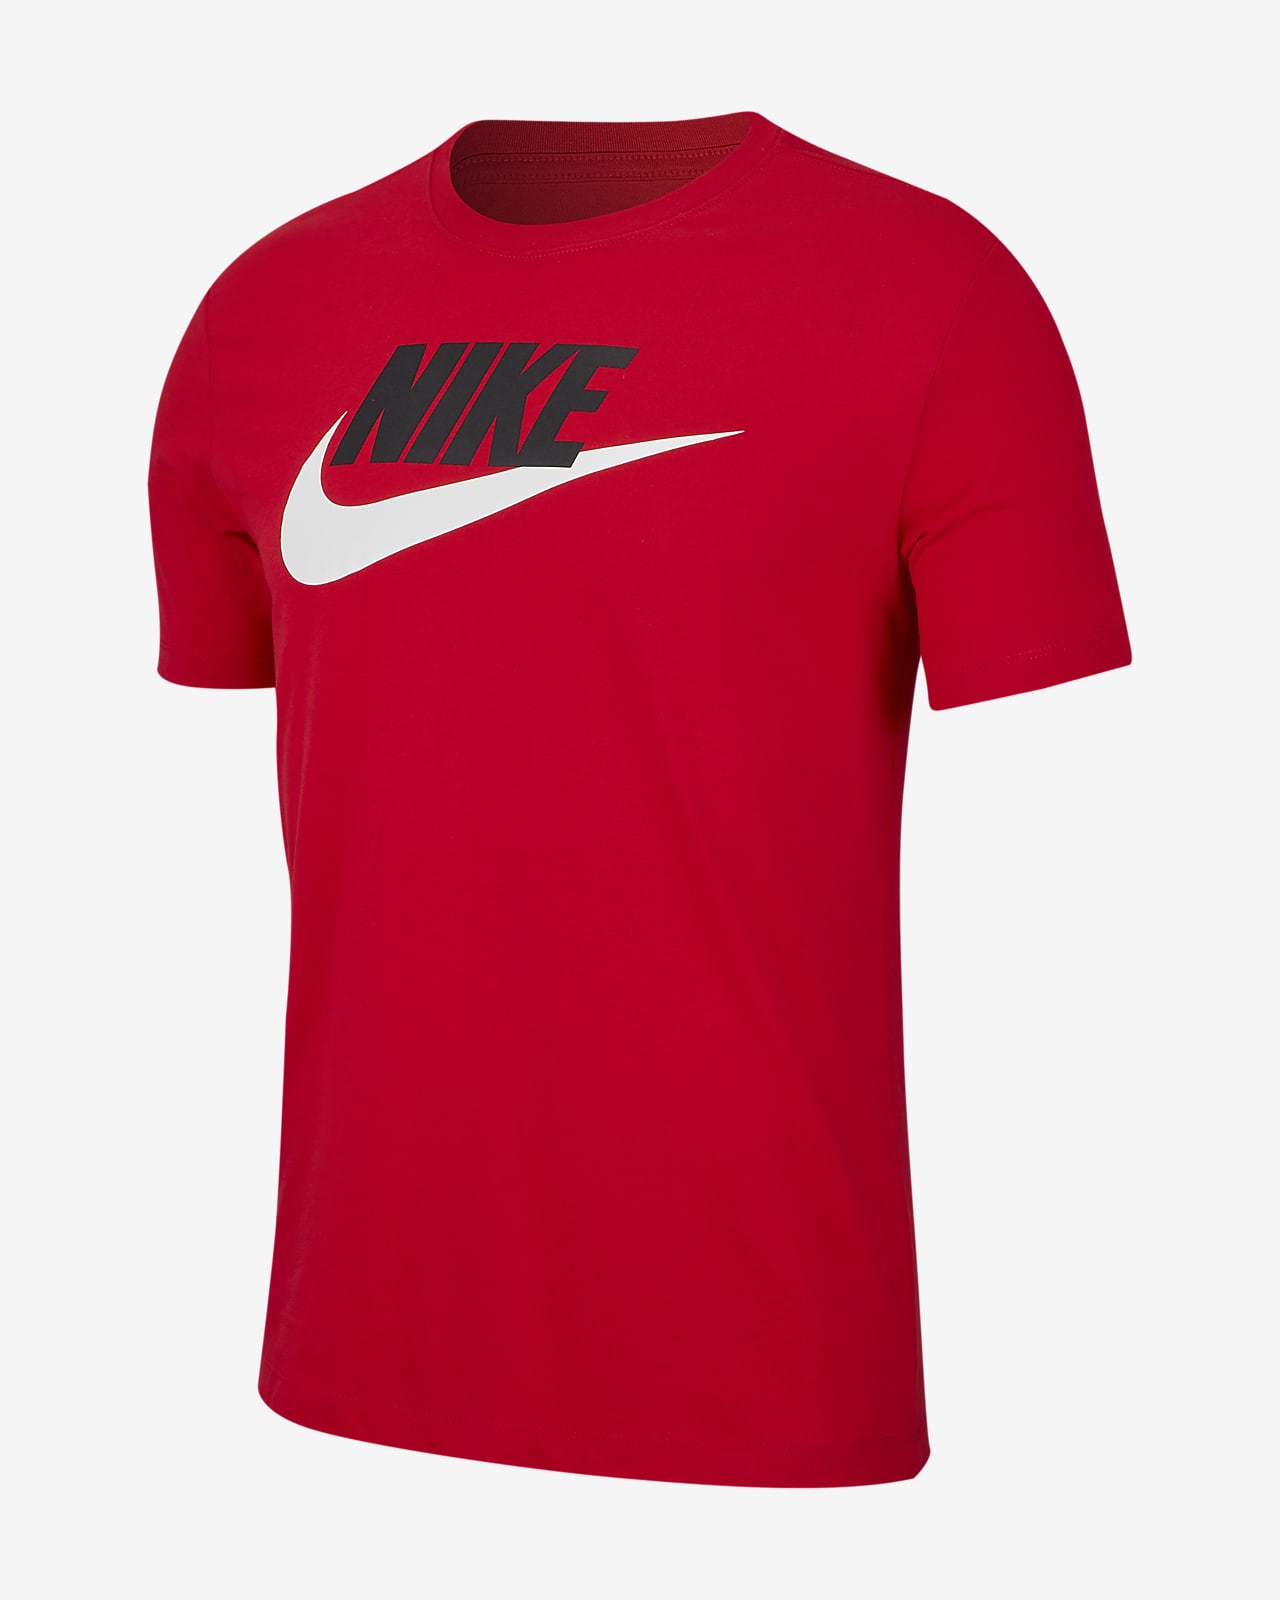 nike shirt red and white